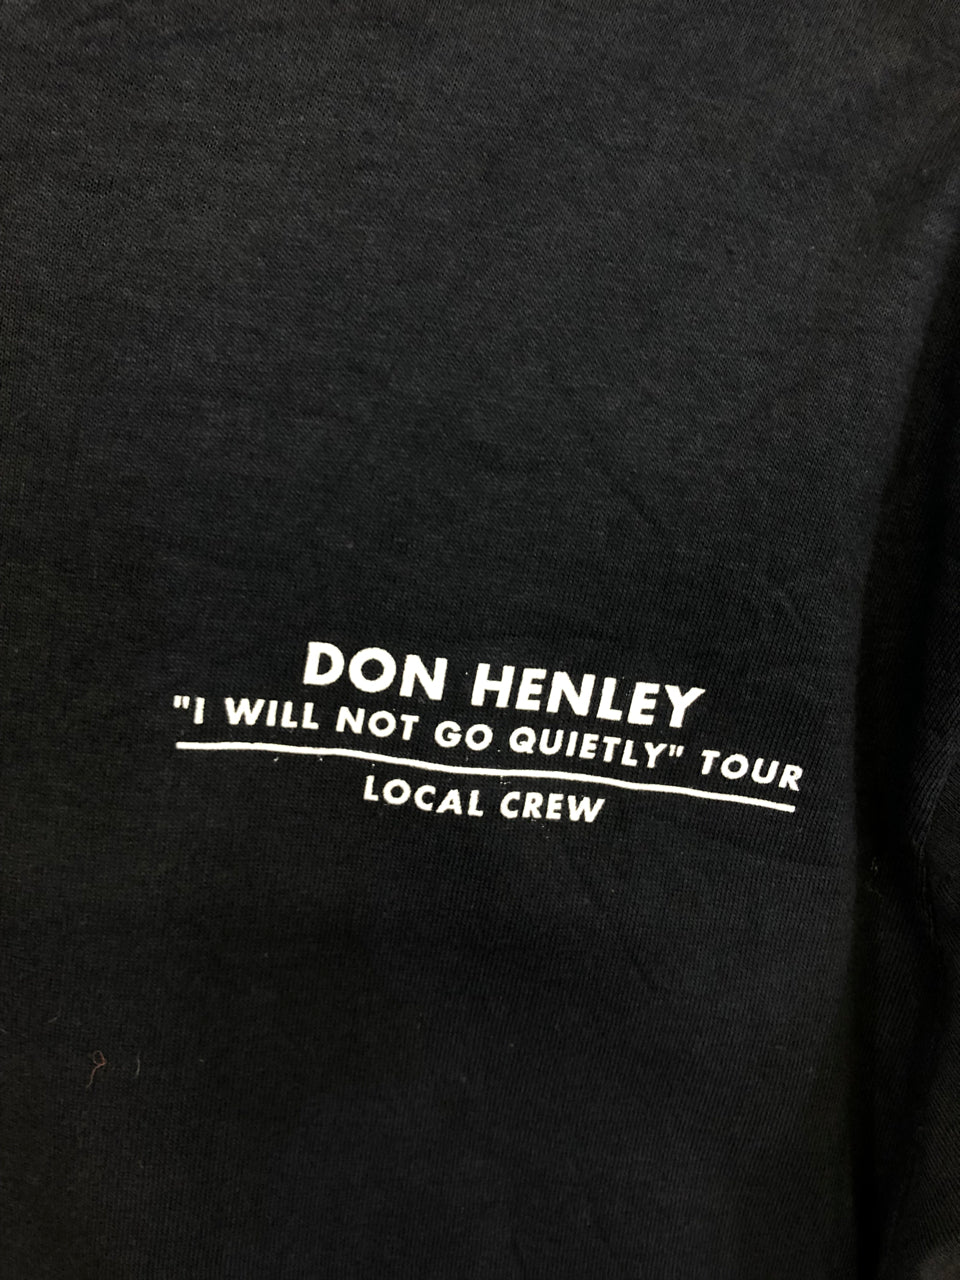 Don Henley "I Will No Quietly" Tour Local Crew T-Shirt